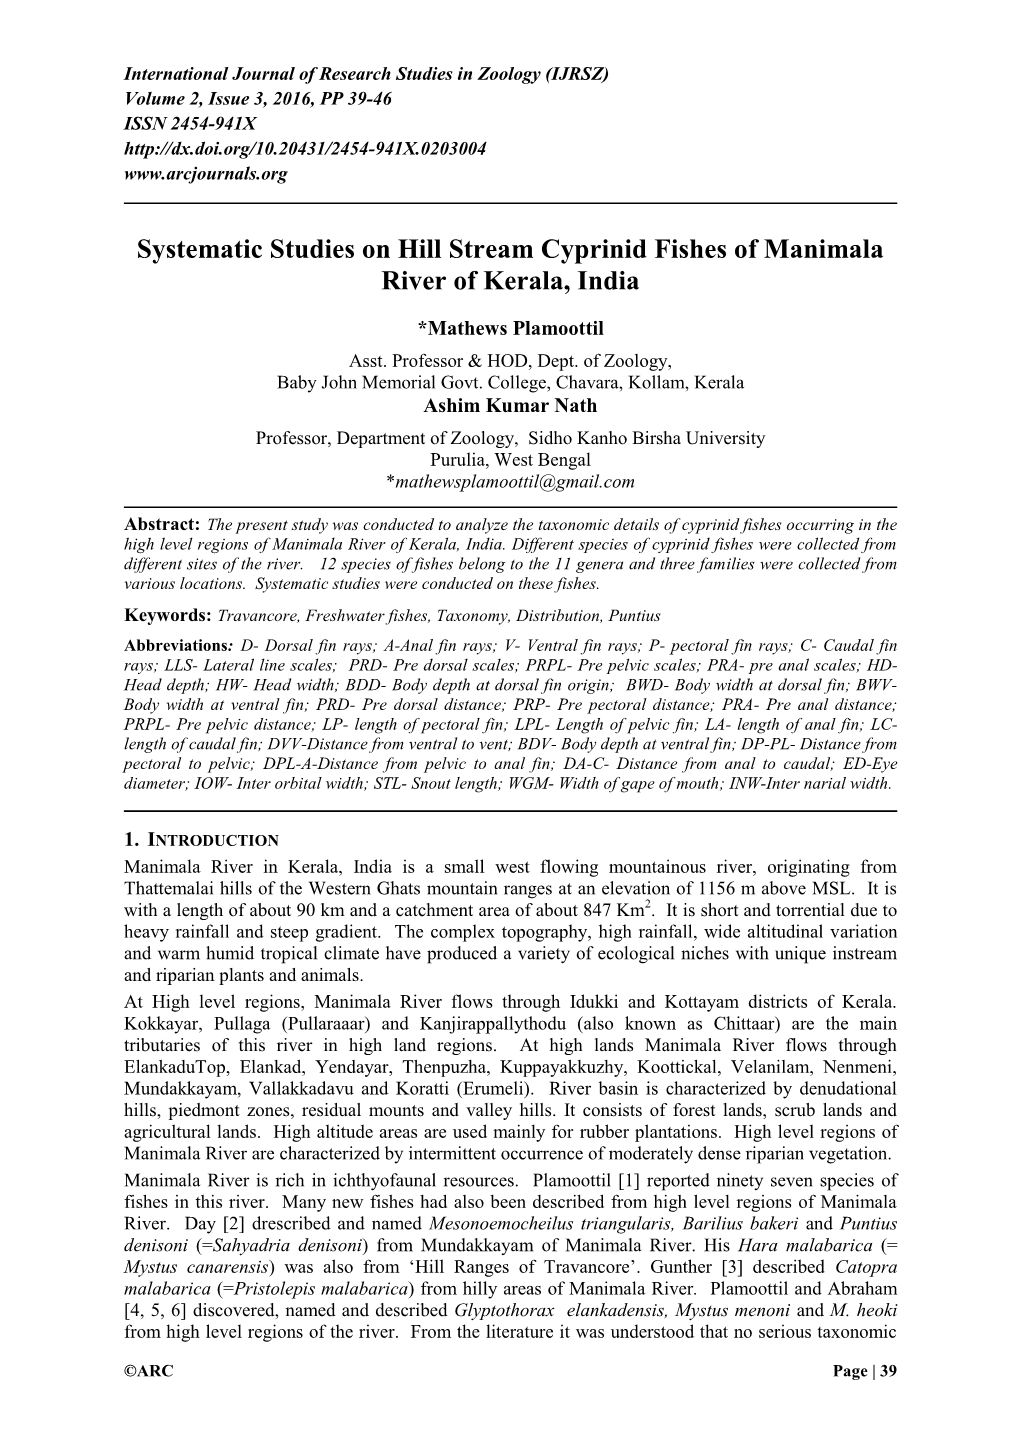 Systematic Studies on Hill Stream Cyprinid Fishes of Manimala River of Kerala, India